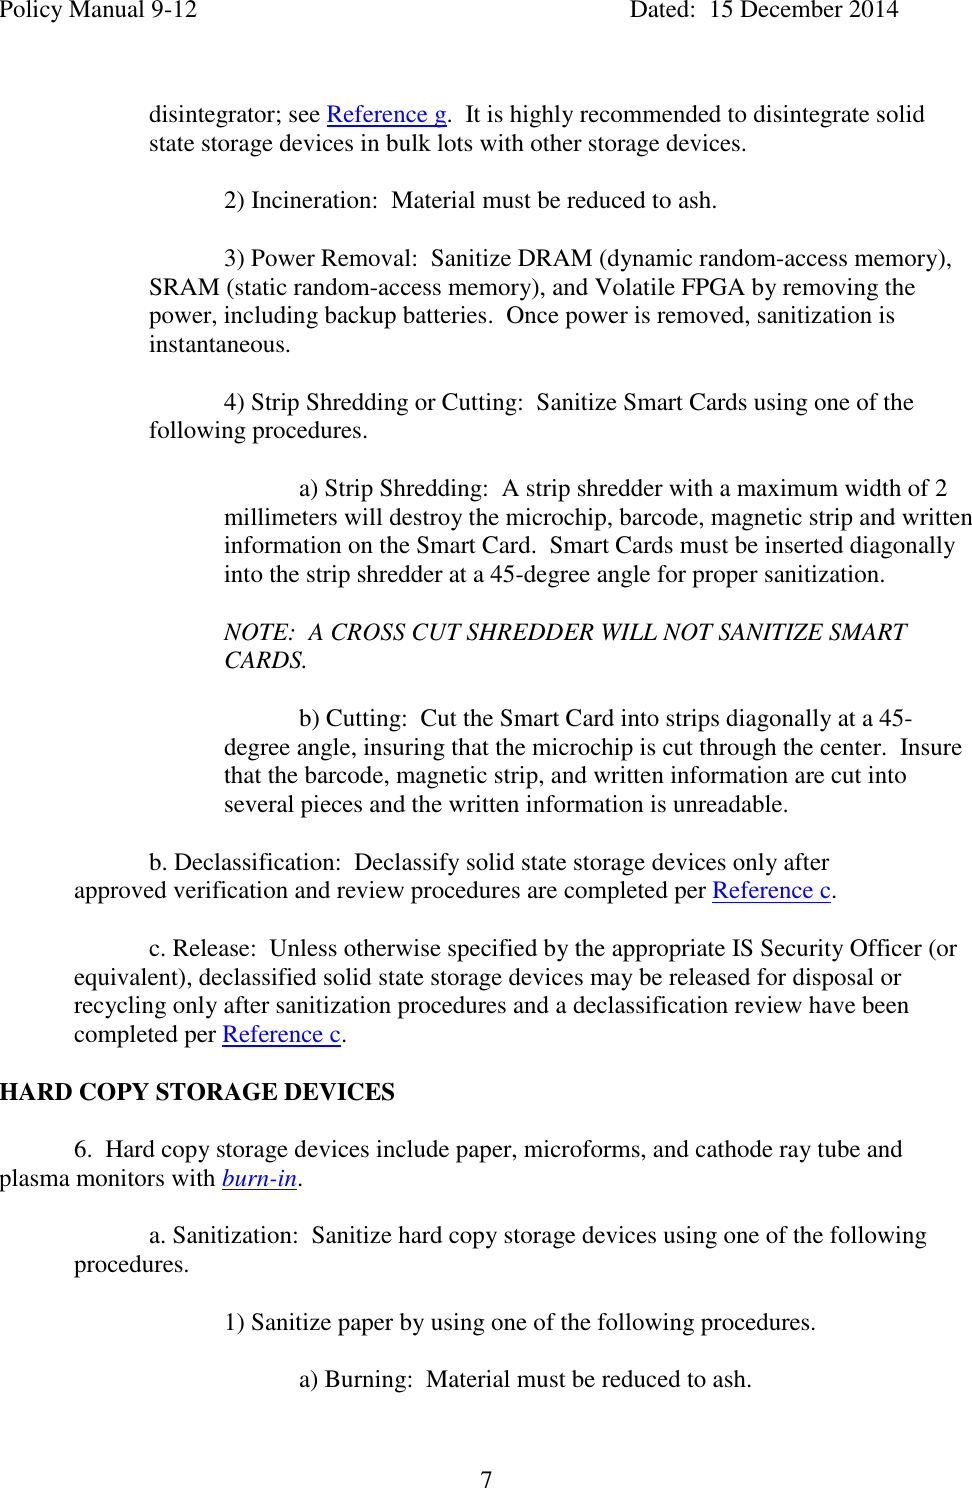 Page 7 of 10 - Storage-device-declassification-manual